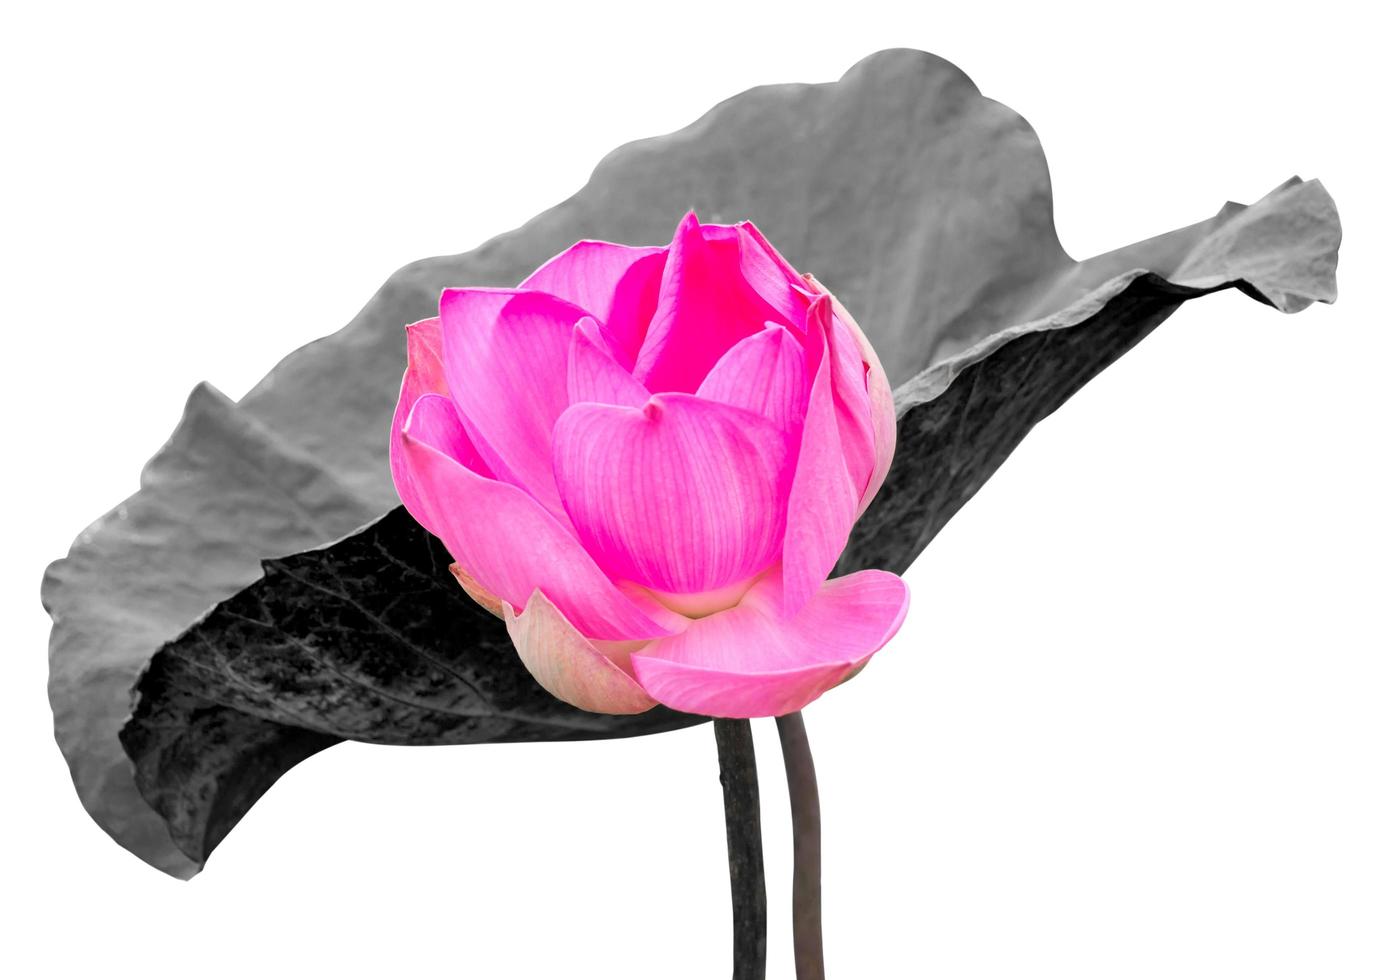 Pink Lotus Blossom with Black Leaf. photo